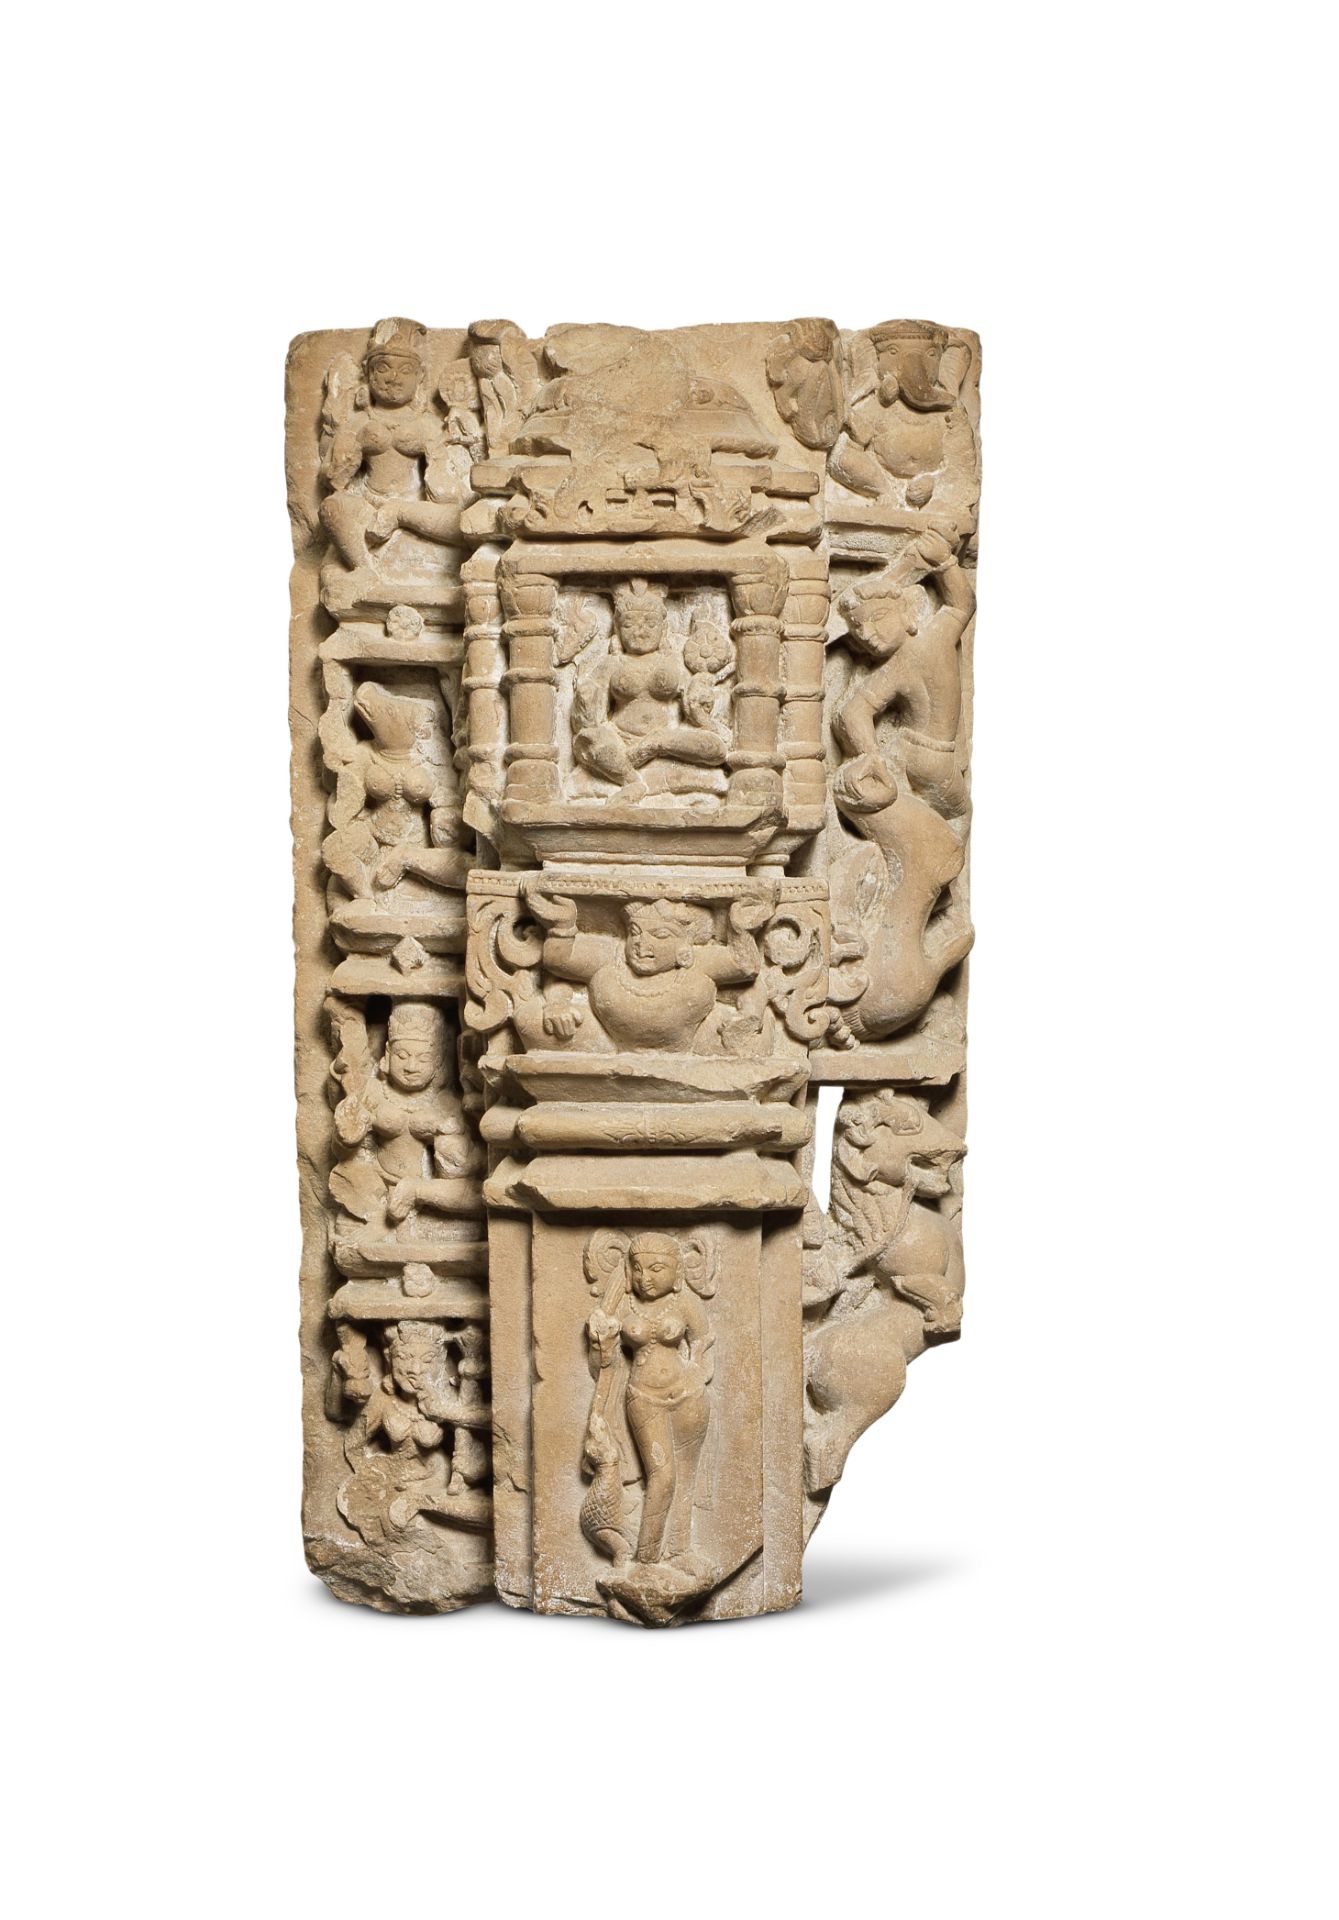 A carved relief sandstone Panel North or Central India, 8th/9th Century